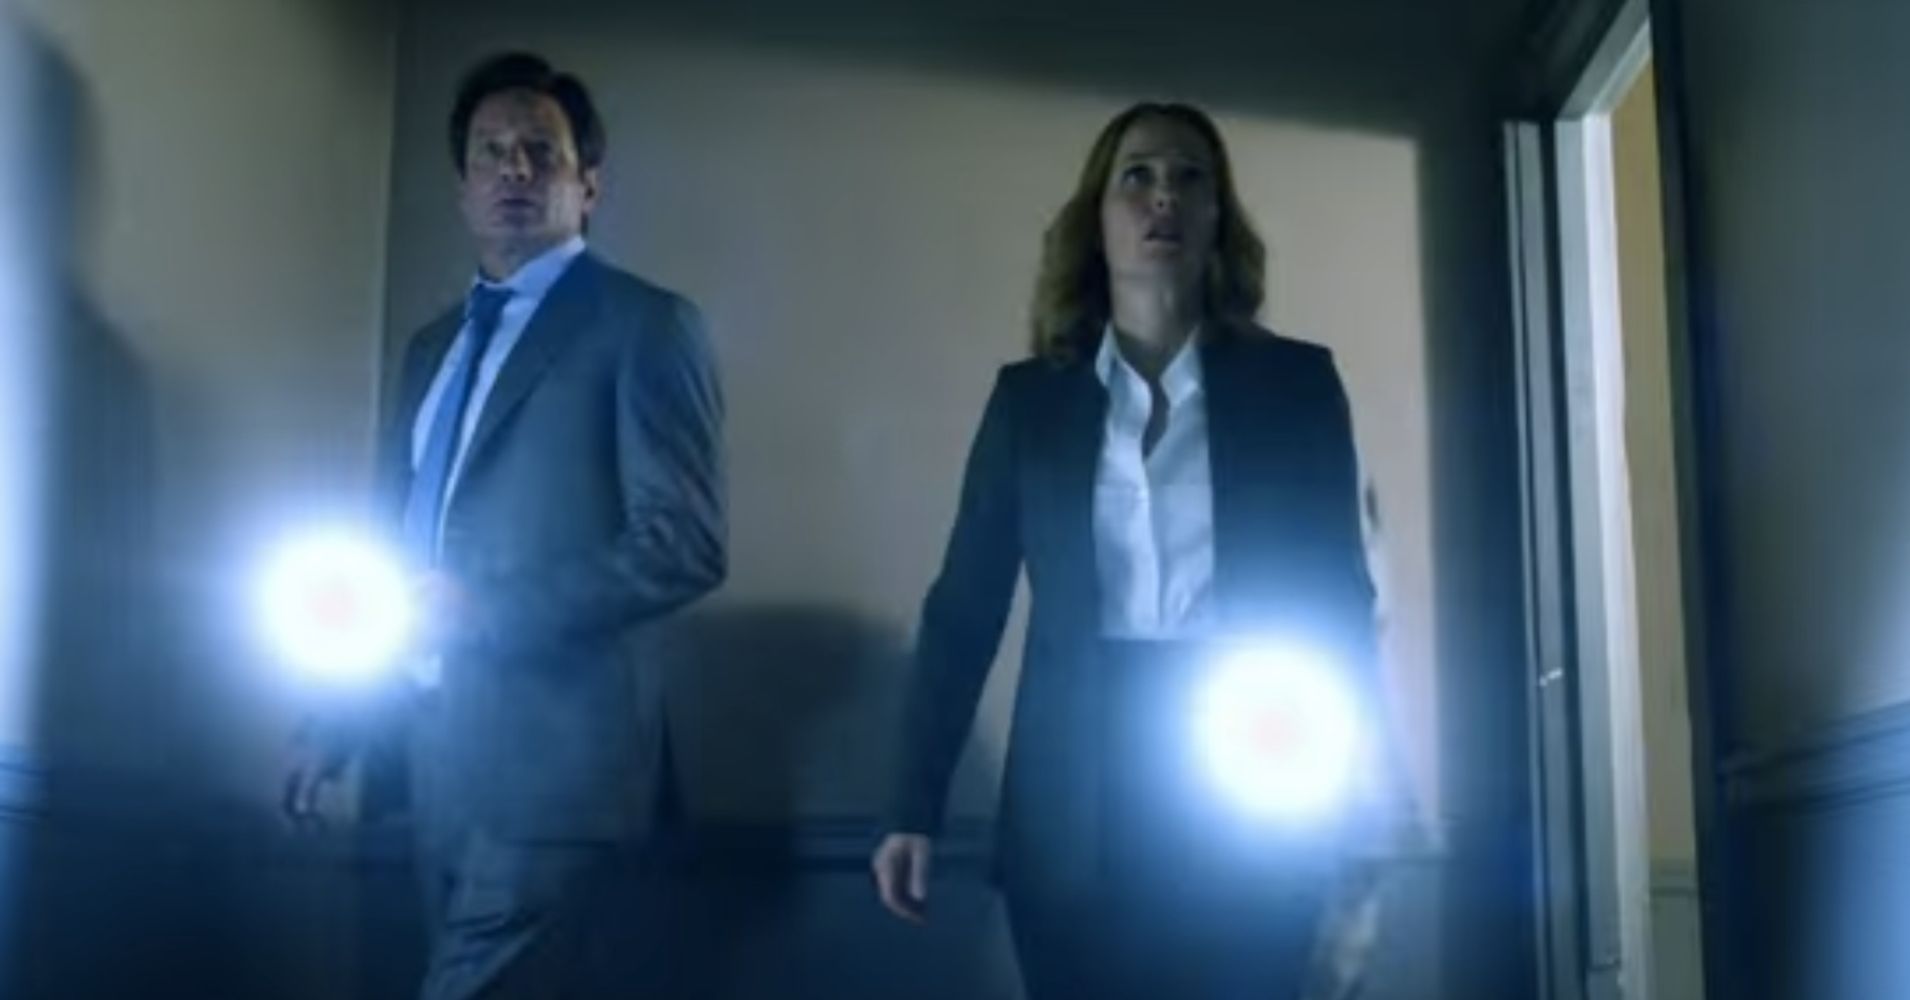 Mulder And Scully Reunite In 2 Part Trailer For The X Files Revival 